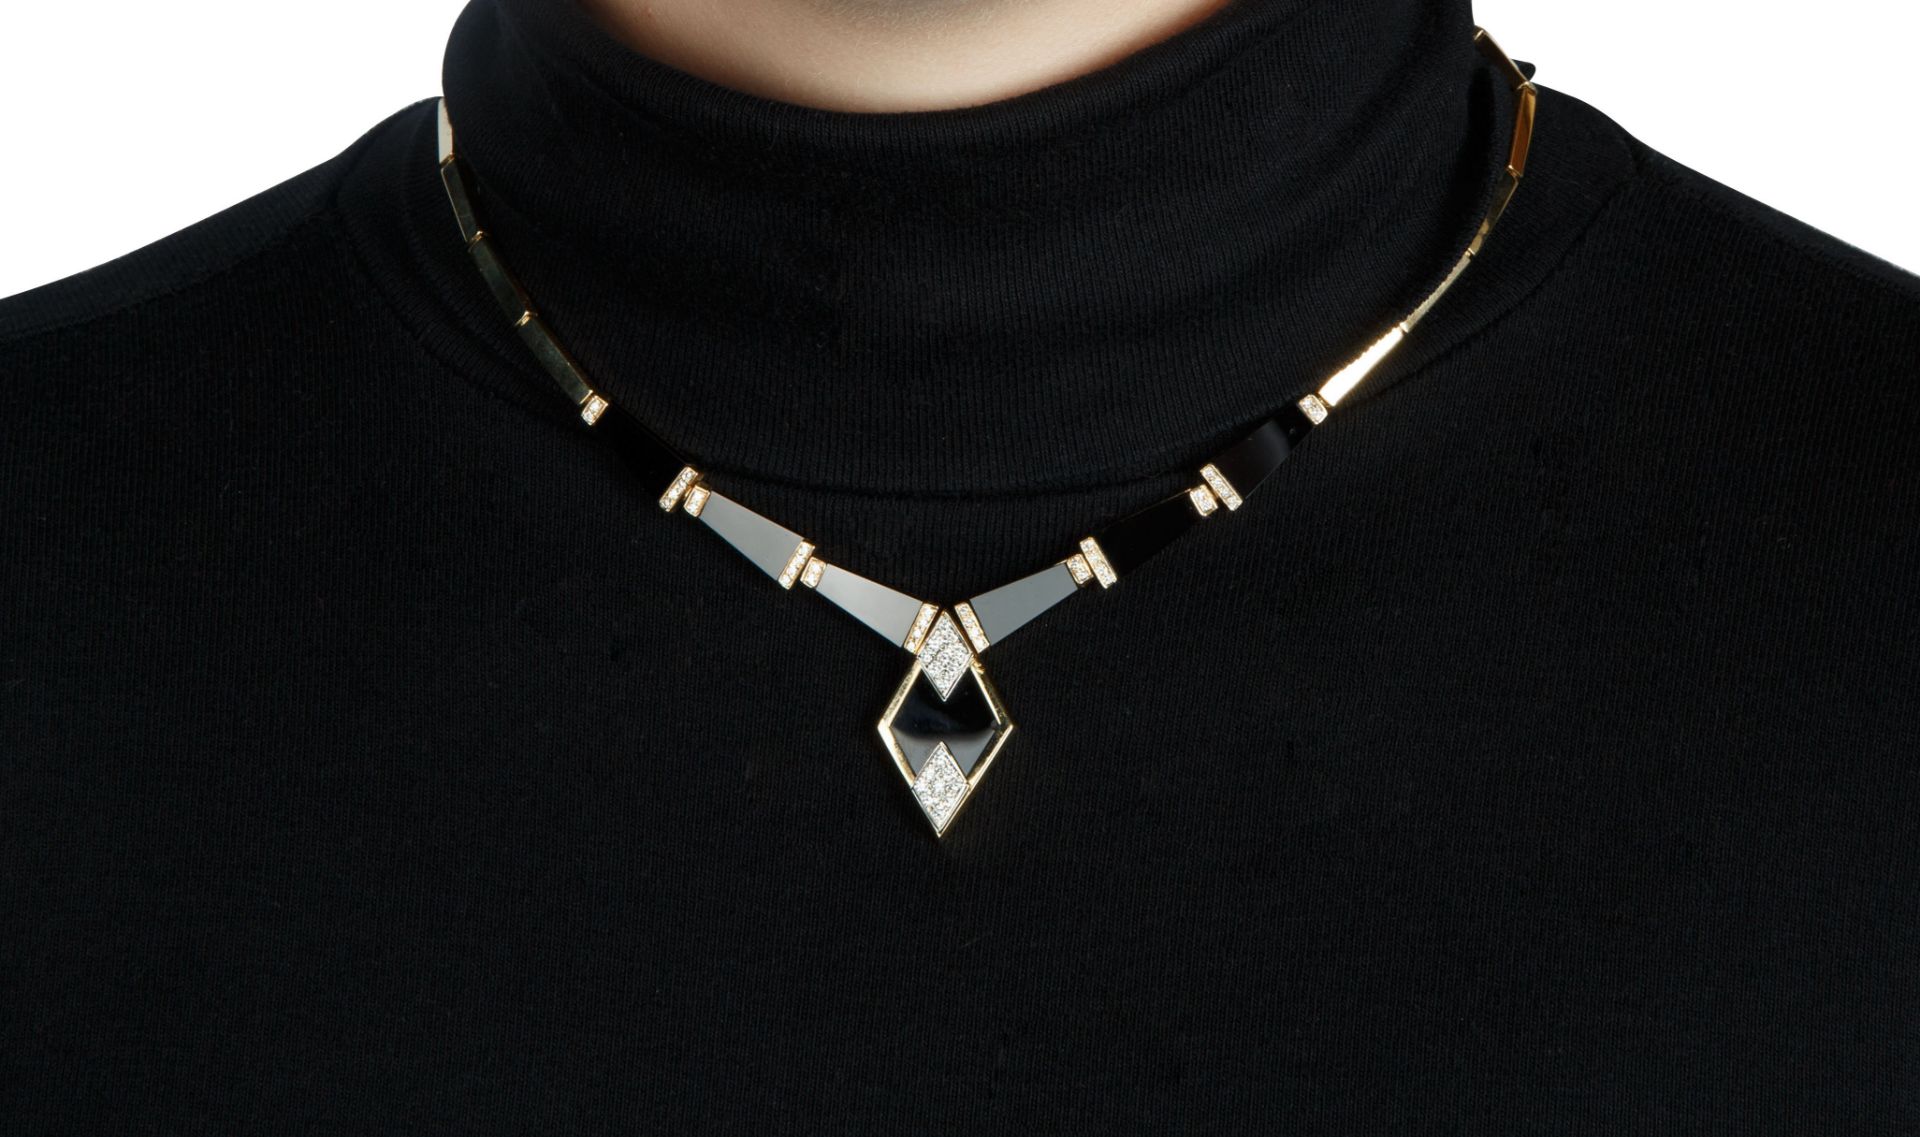 ART DECO STYLE ONYX, DIAMOND AND GOLD NECKLACE - Image 6 of 6